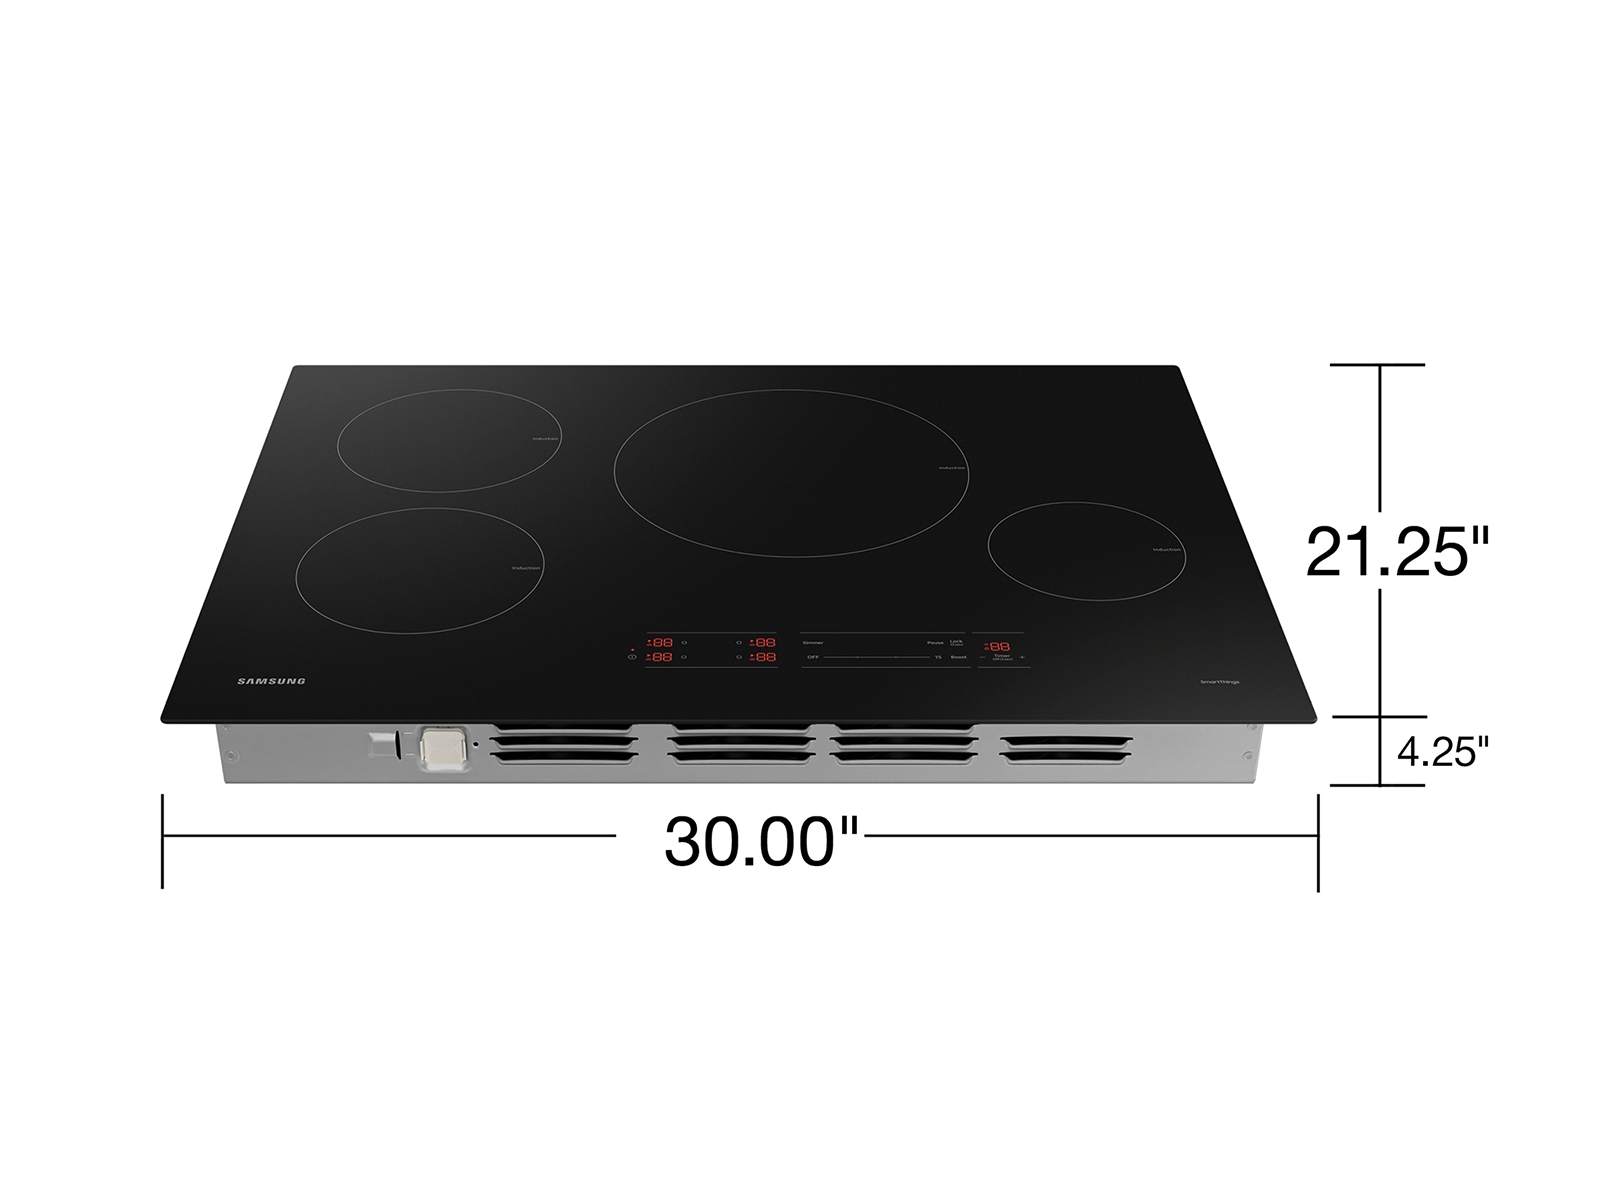 https://image-us.samsung.com/SamsungUS/home/home-appliances/cooktops-and-hoods/electric-cooktops/gallery/NZ30A3060UK_How-to-Measure_Black_SCOM.jpg?$product-details-jpg$